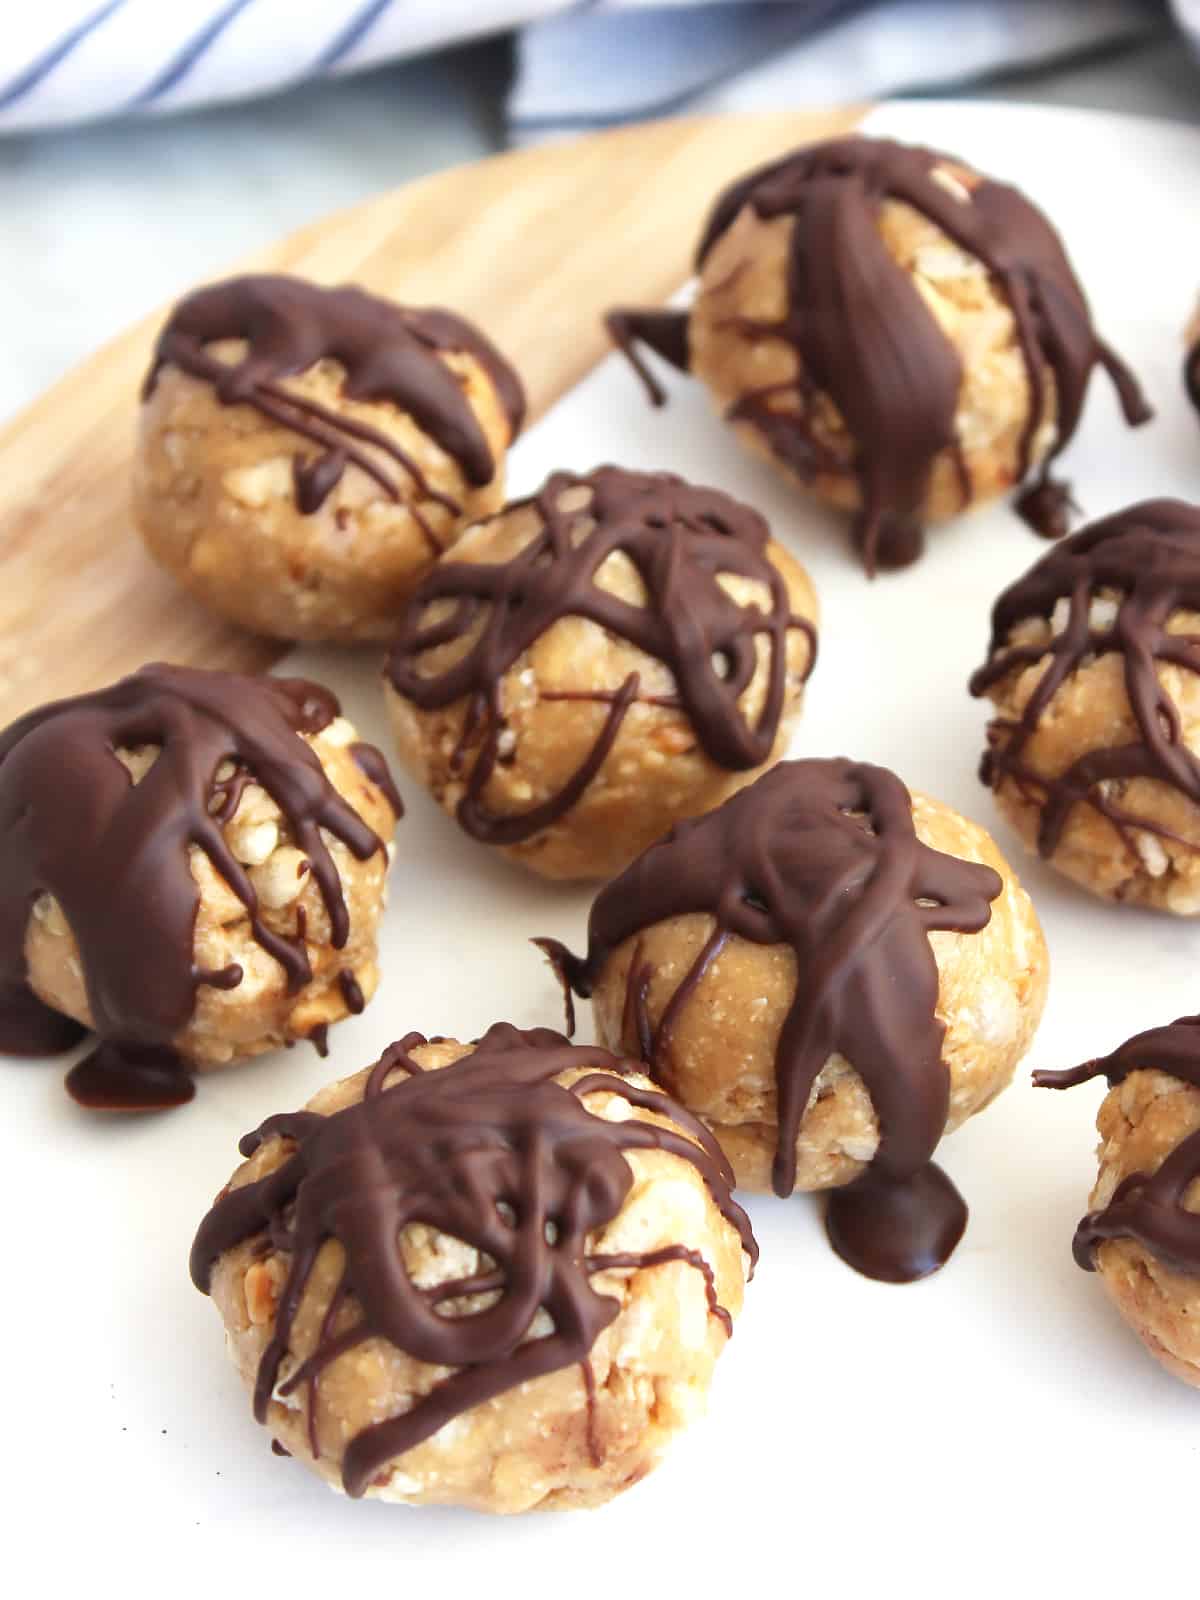 Healthy bites drizzled in chocolate and ready to eat